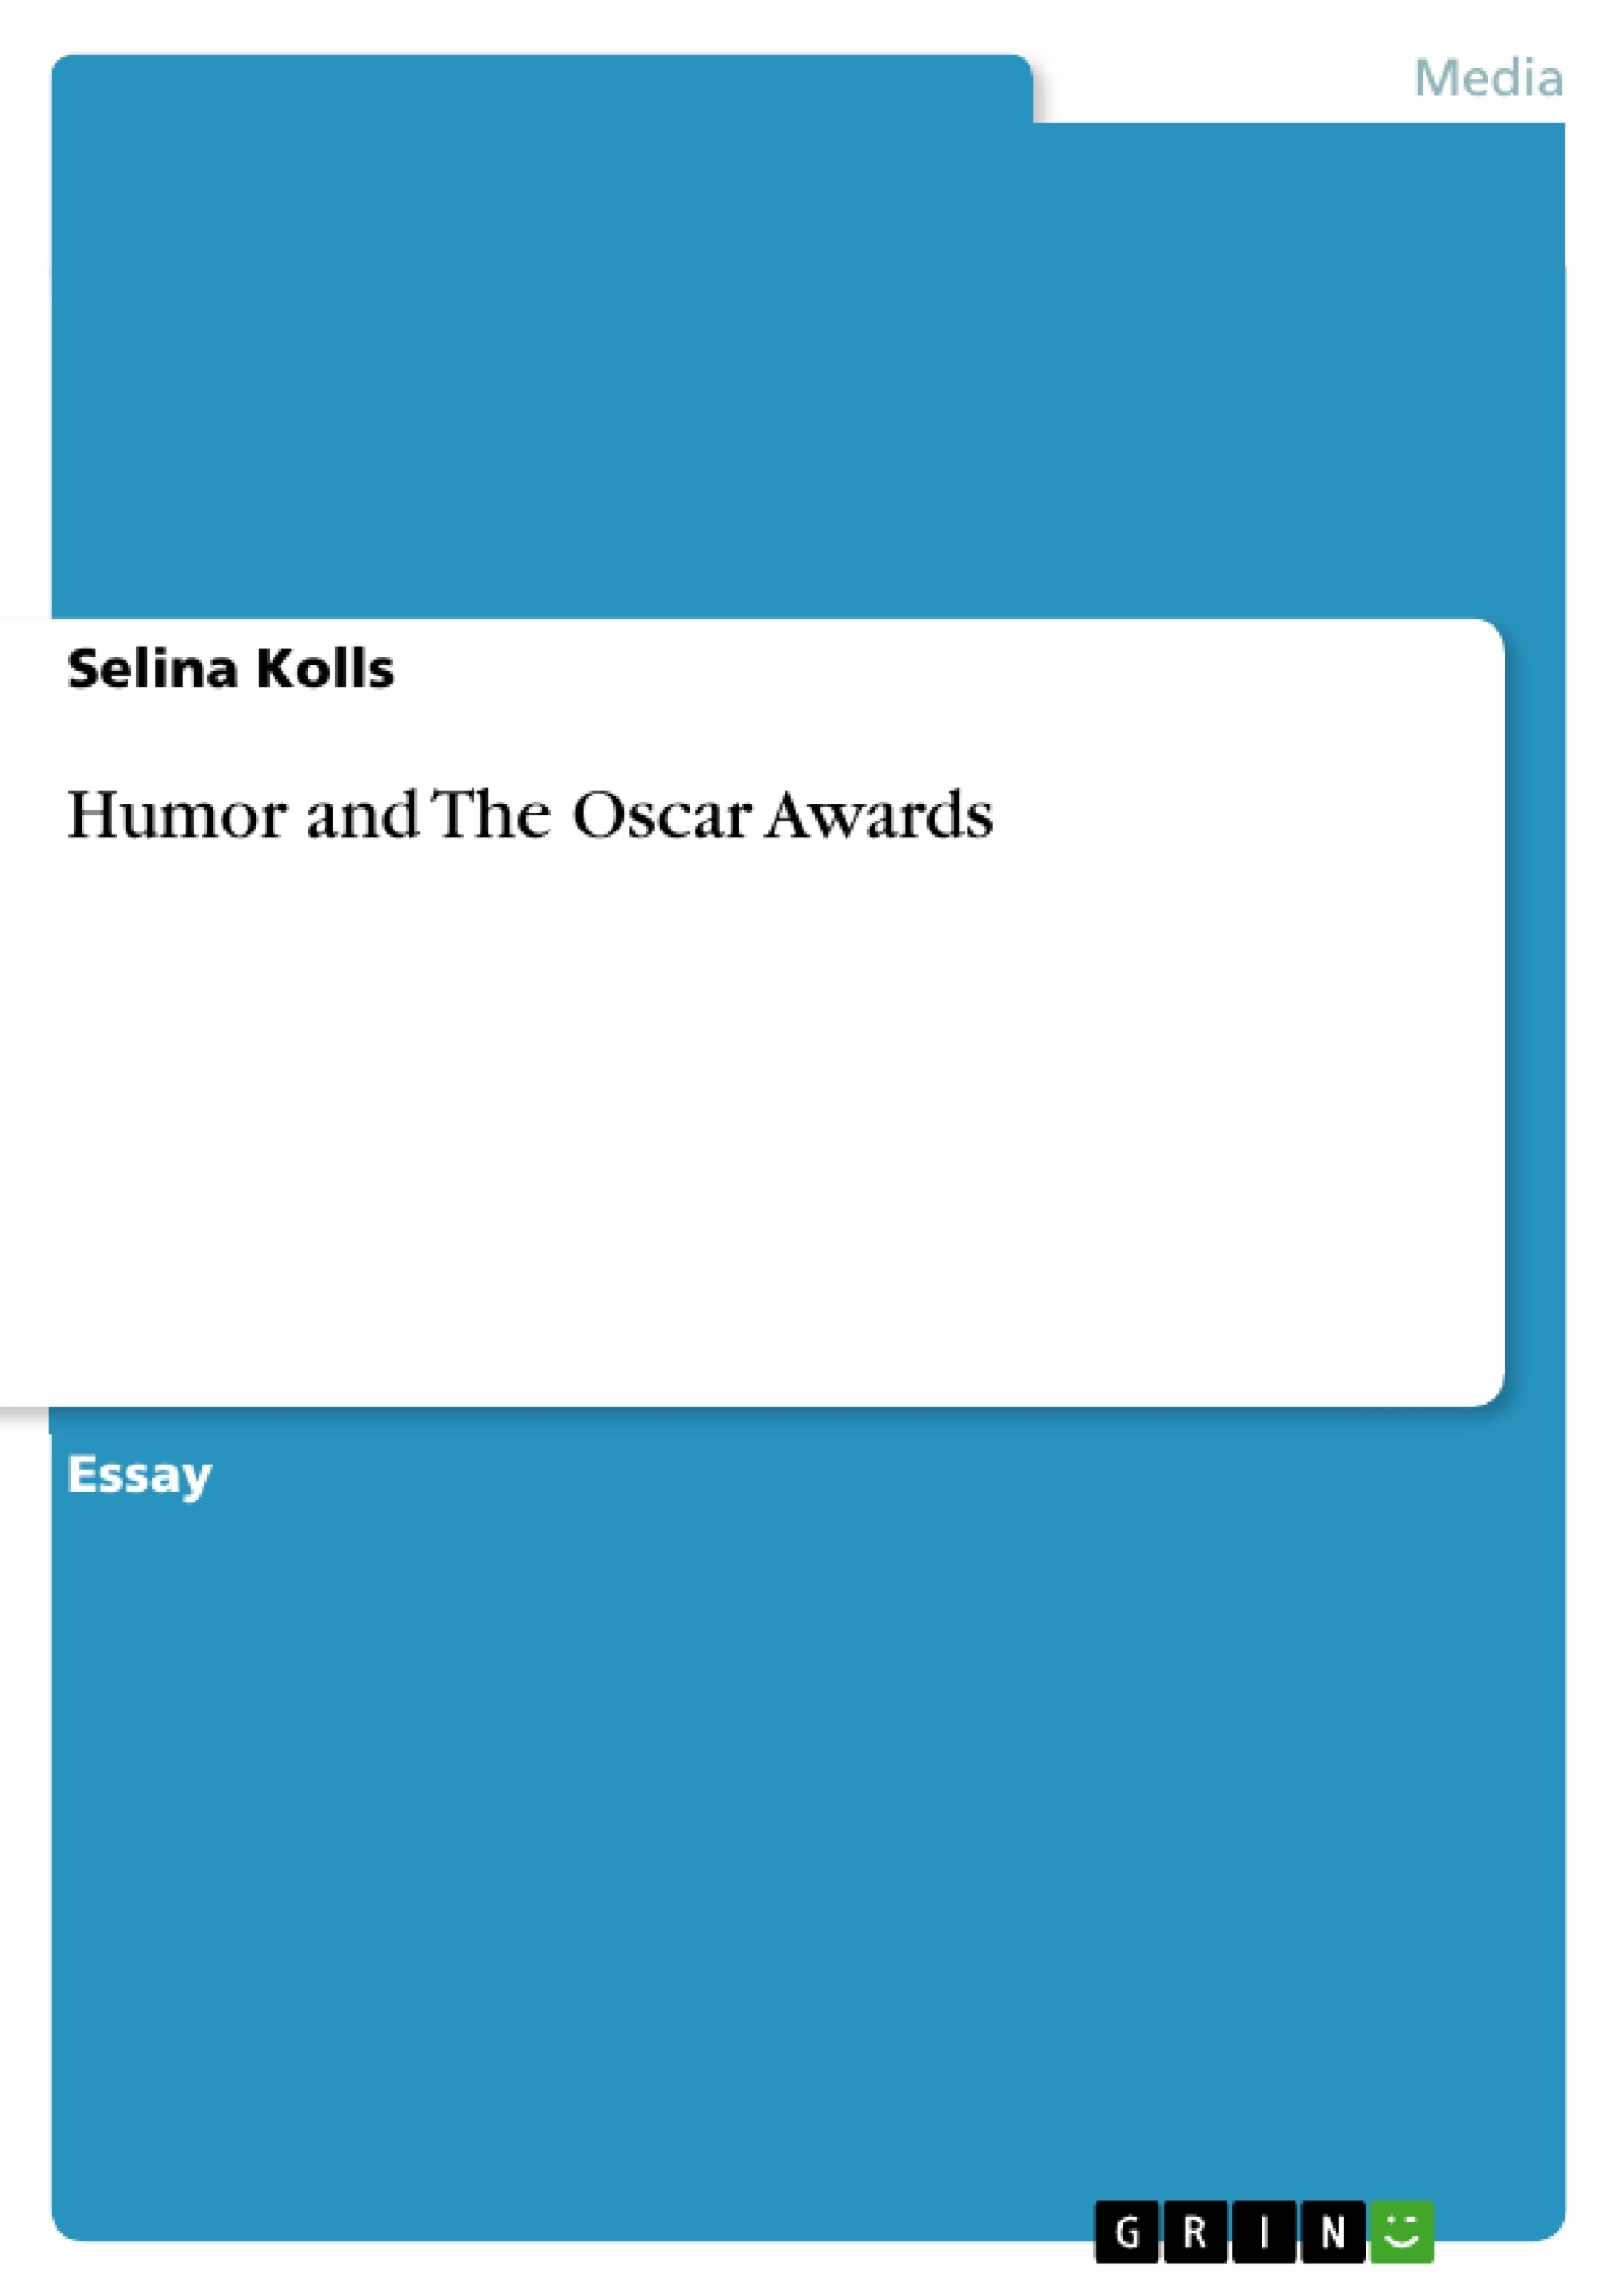 Title: Humor and The Oscar Awards